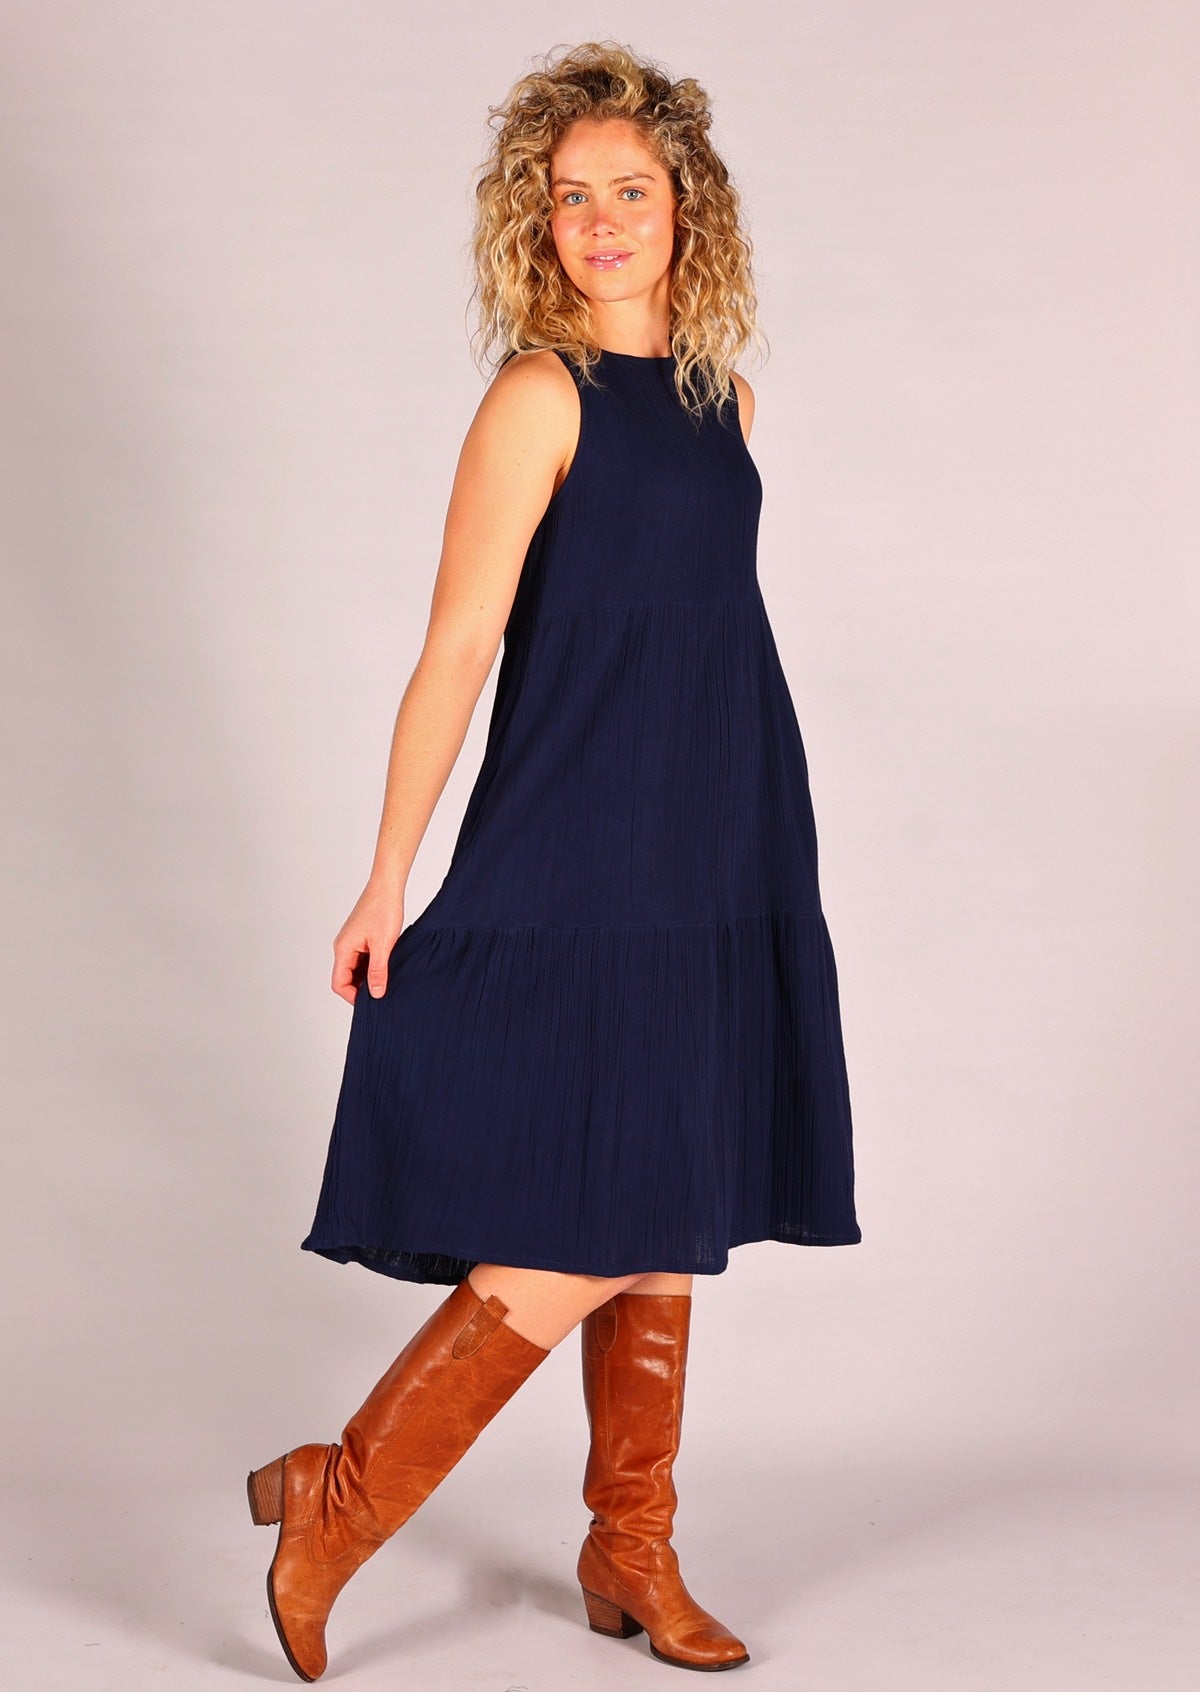 Sleeveless dress with high round neckline and tiers